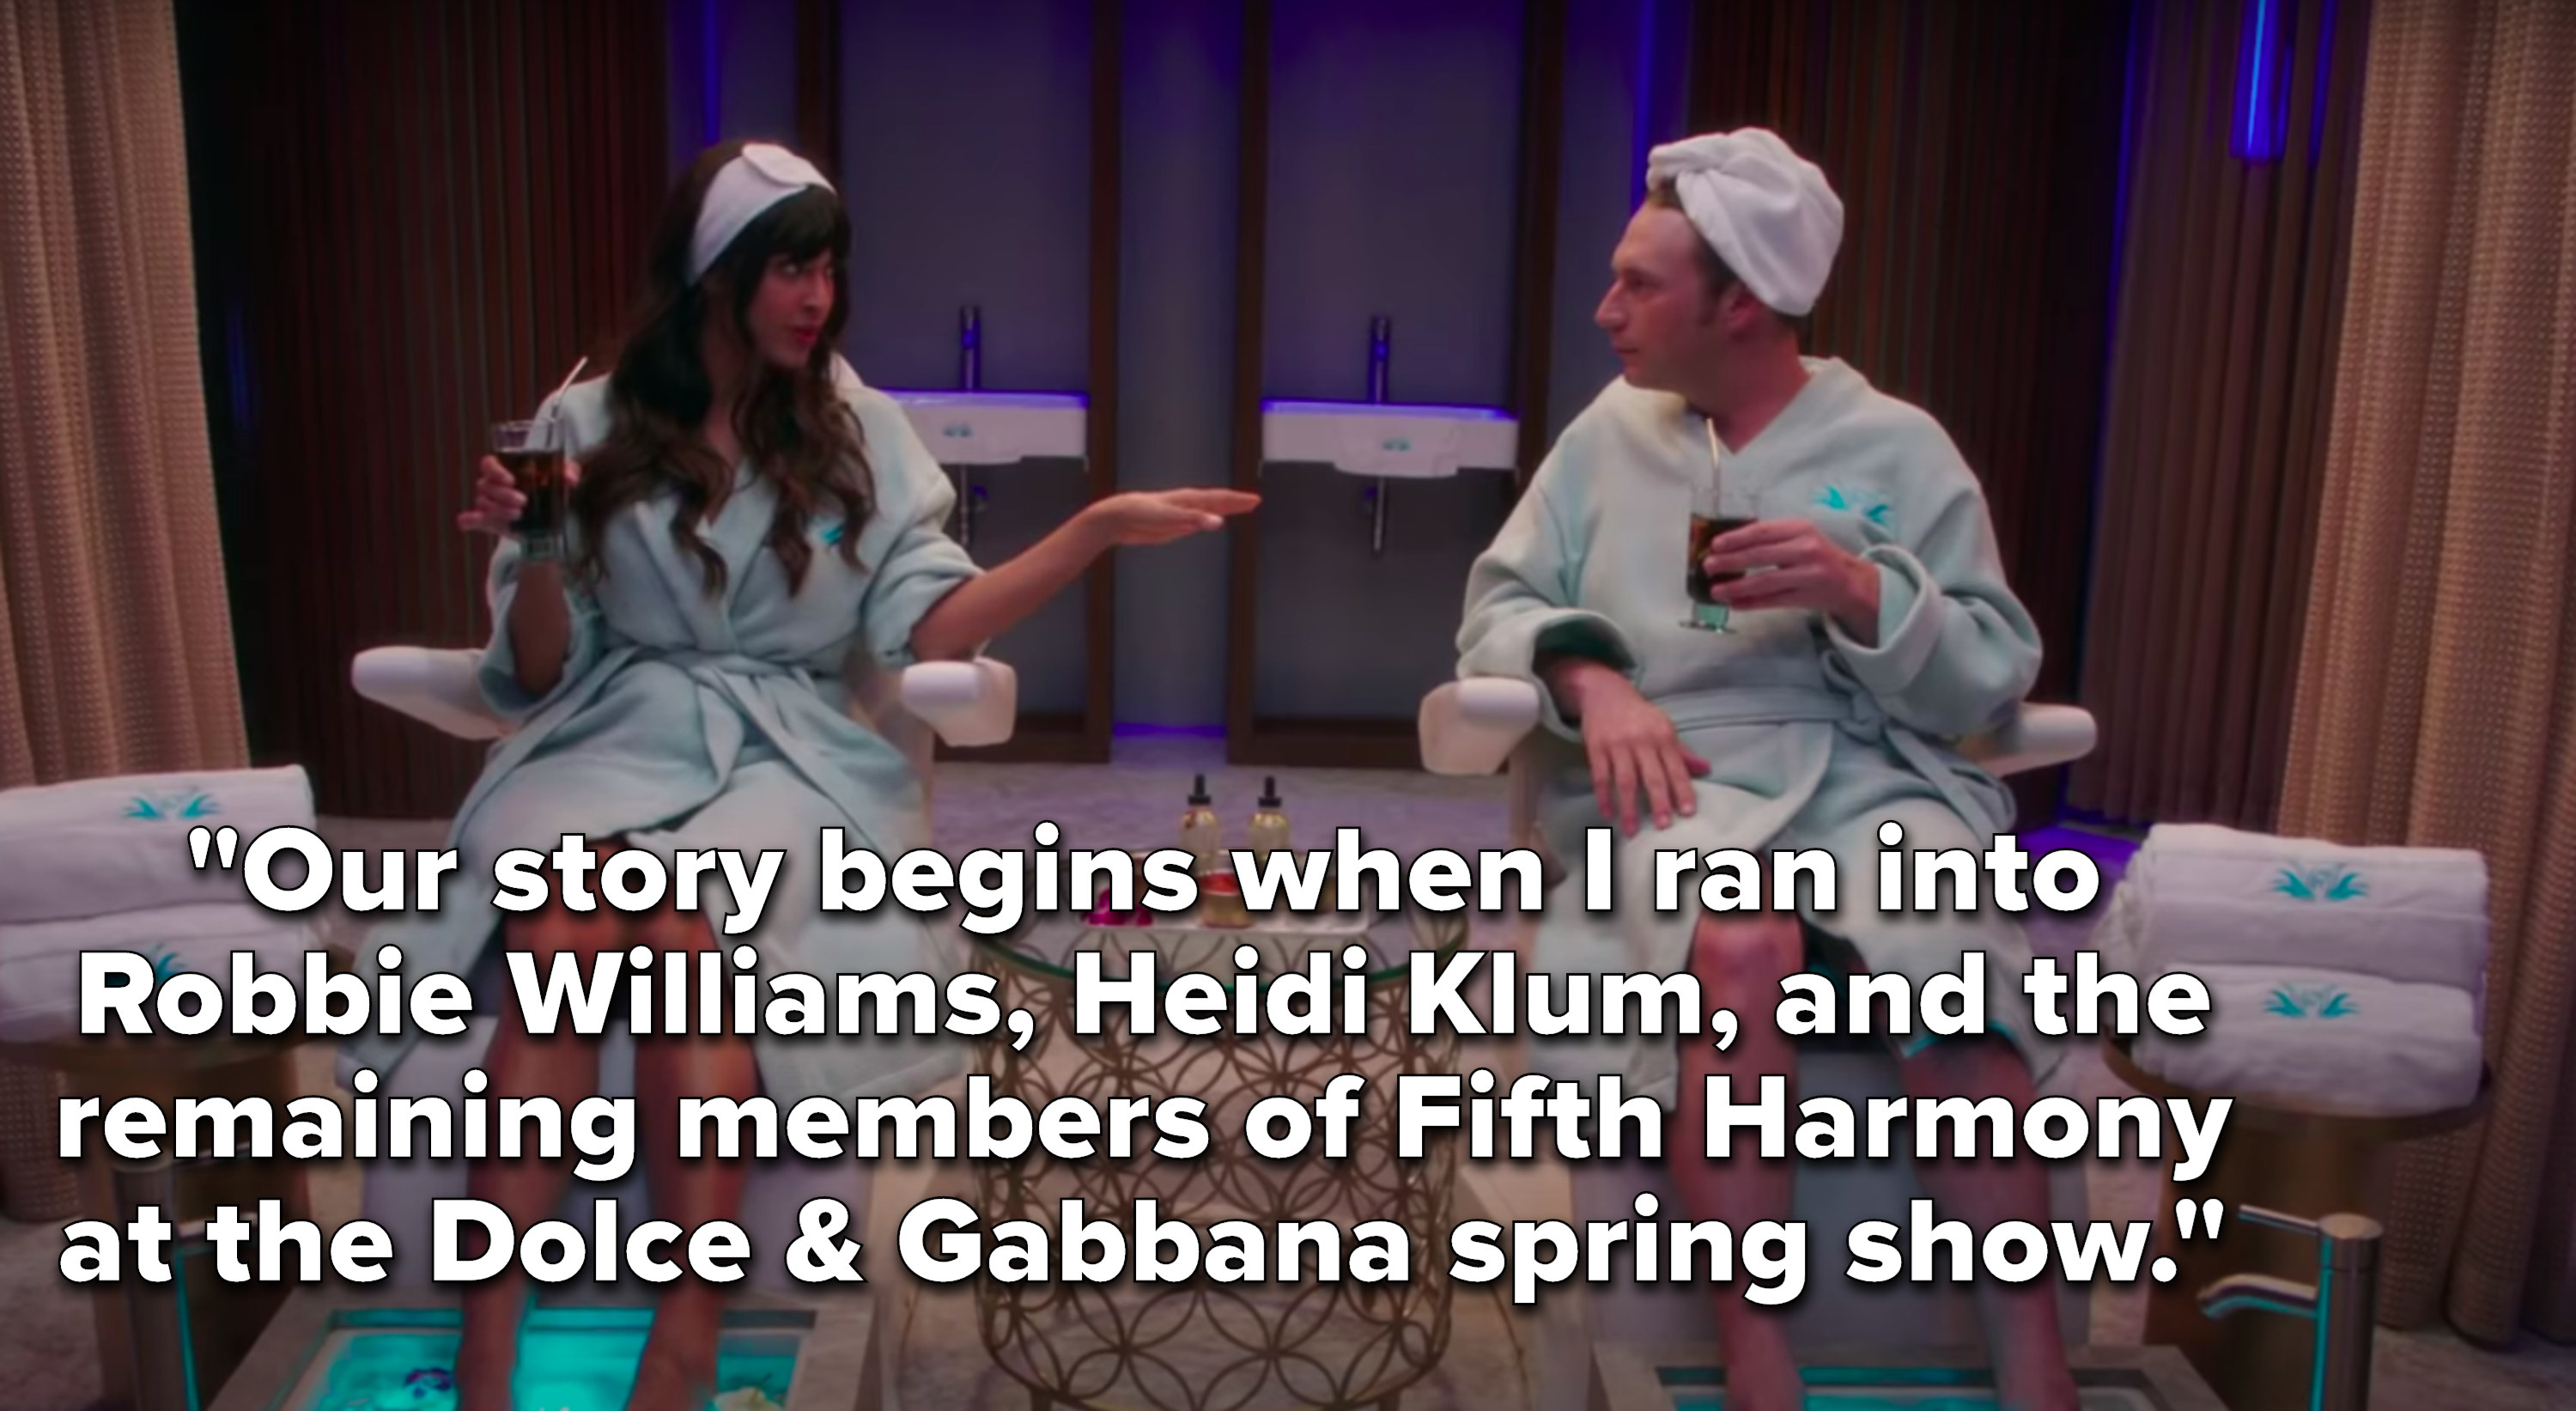 Tahani says, Our story begins when I ran into Robbie Williams, Heidi Klum, and the remaining members of Fifth Harmony at the Dolce and Gabbana spring show